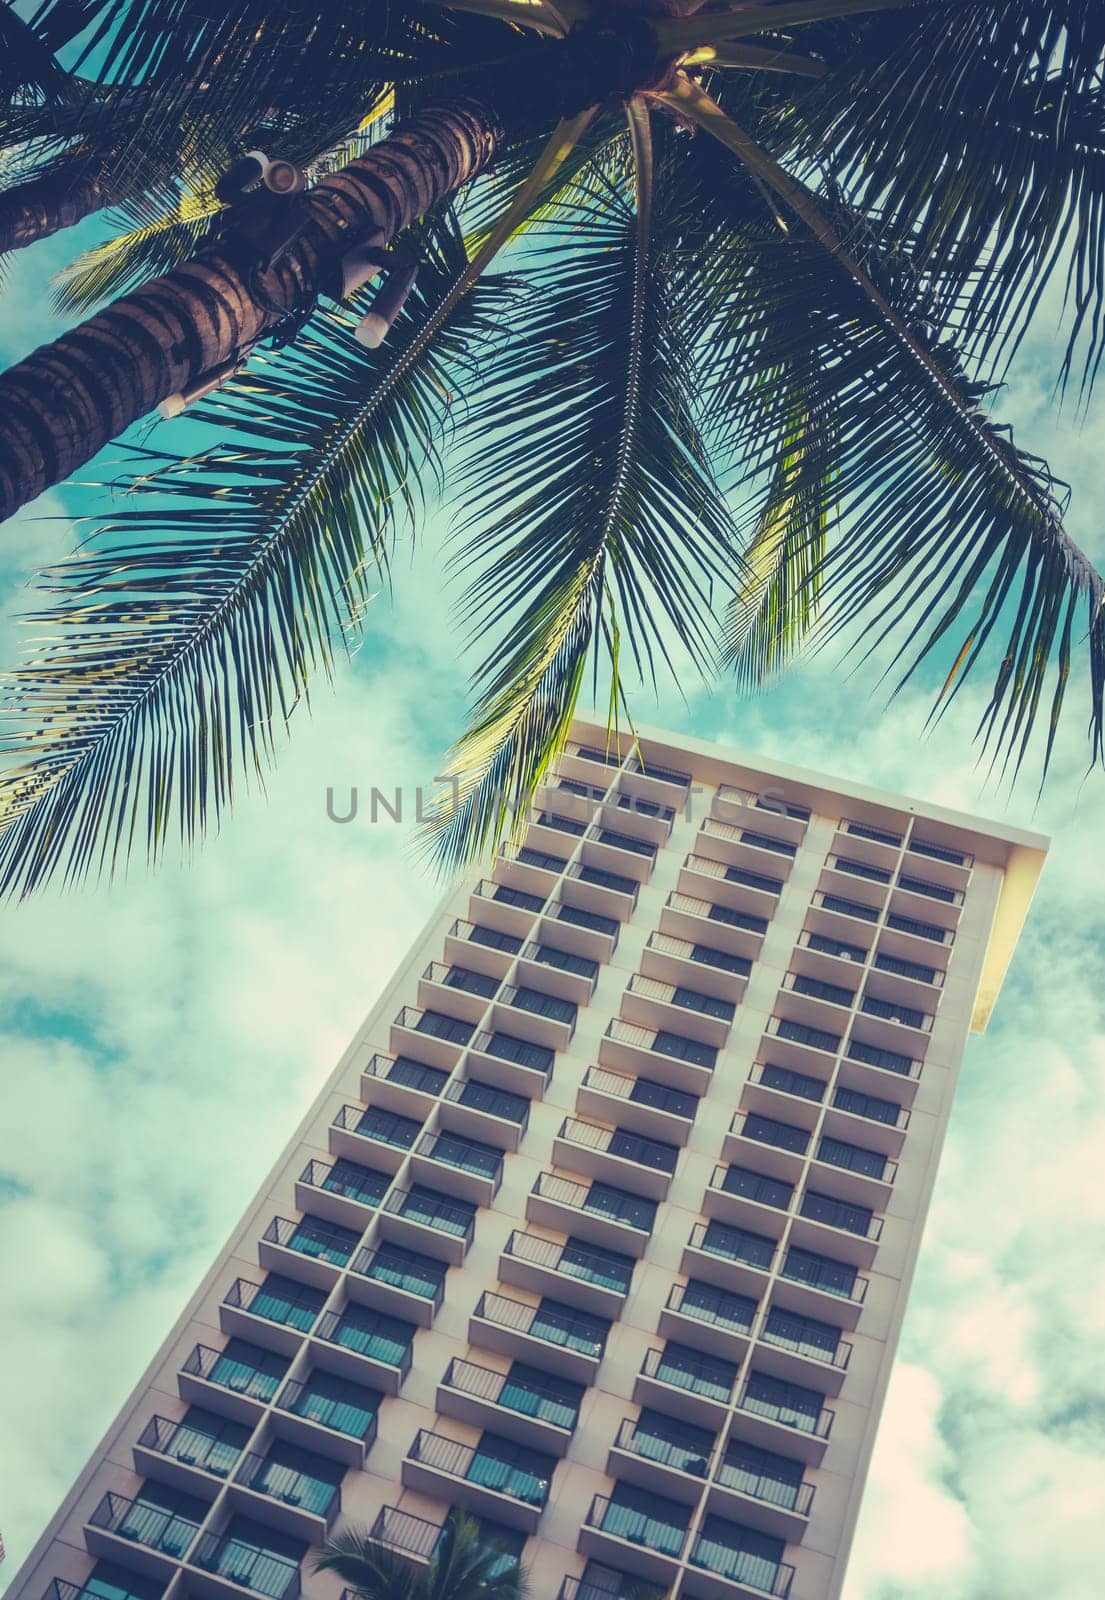 Retro Style Image Of A Hotel In Hawaii